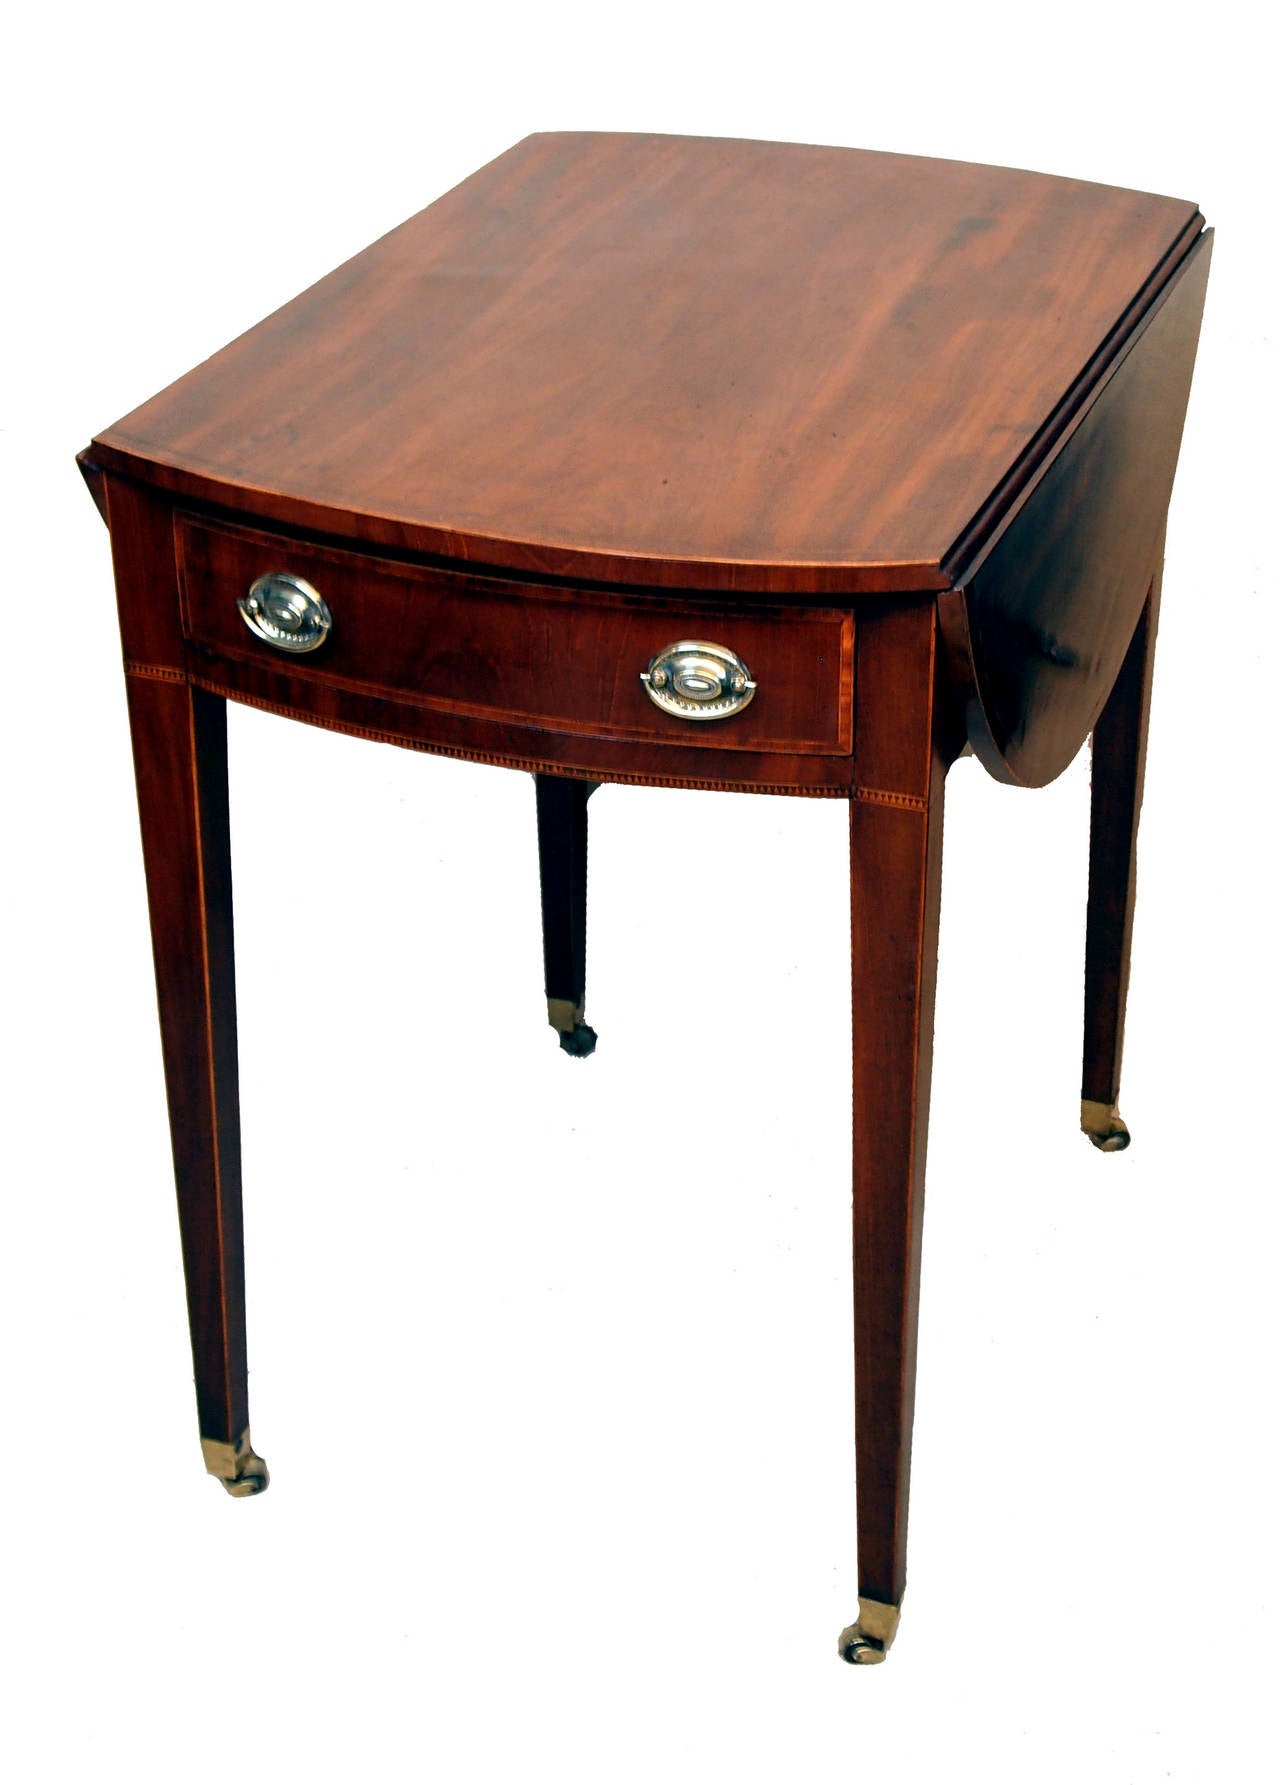 A late 18th century mahogany pembroke table having well figured
top with oval drop flaps and one frieze drawer raised on elegant
square tapering legs.

H - 28.5in.
W - 19.5in (flaps down.) 
W - 36.5in (flaps up.) 
D - 27.5in.